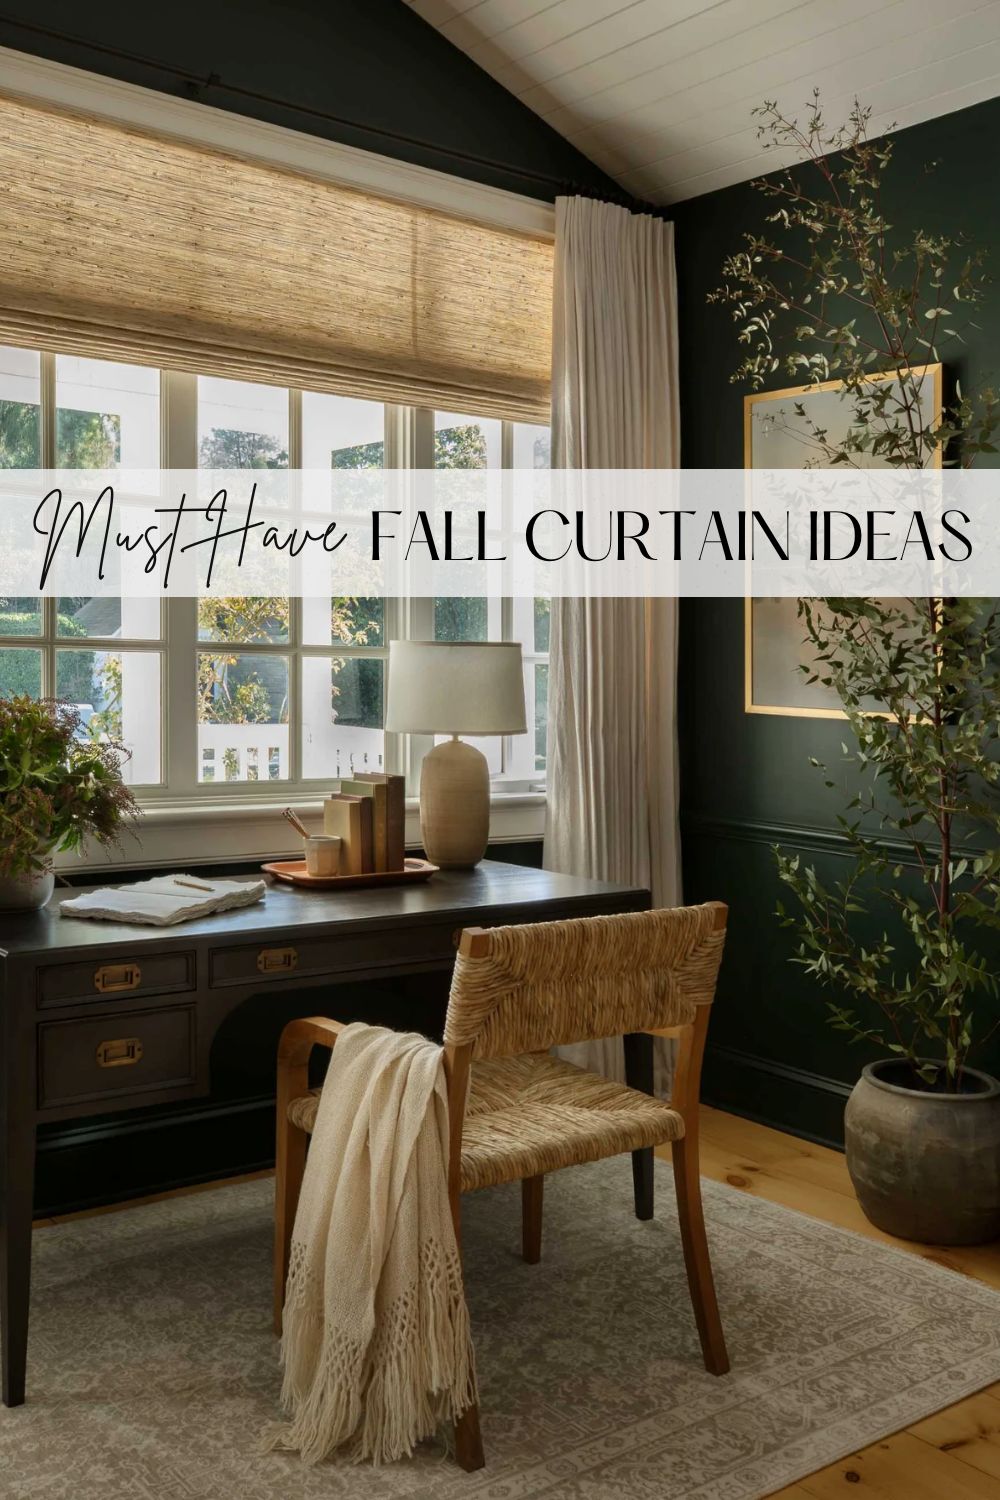 Layering Options for Fall Decor